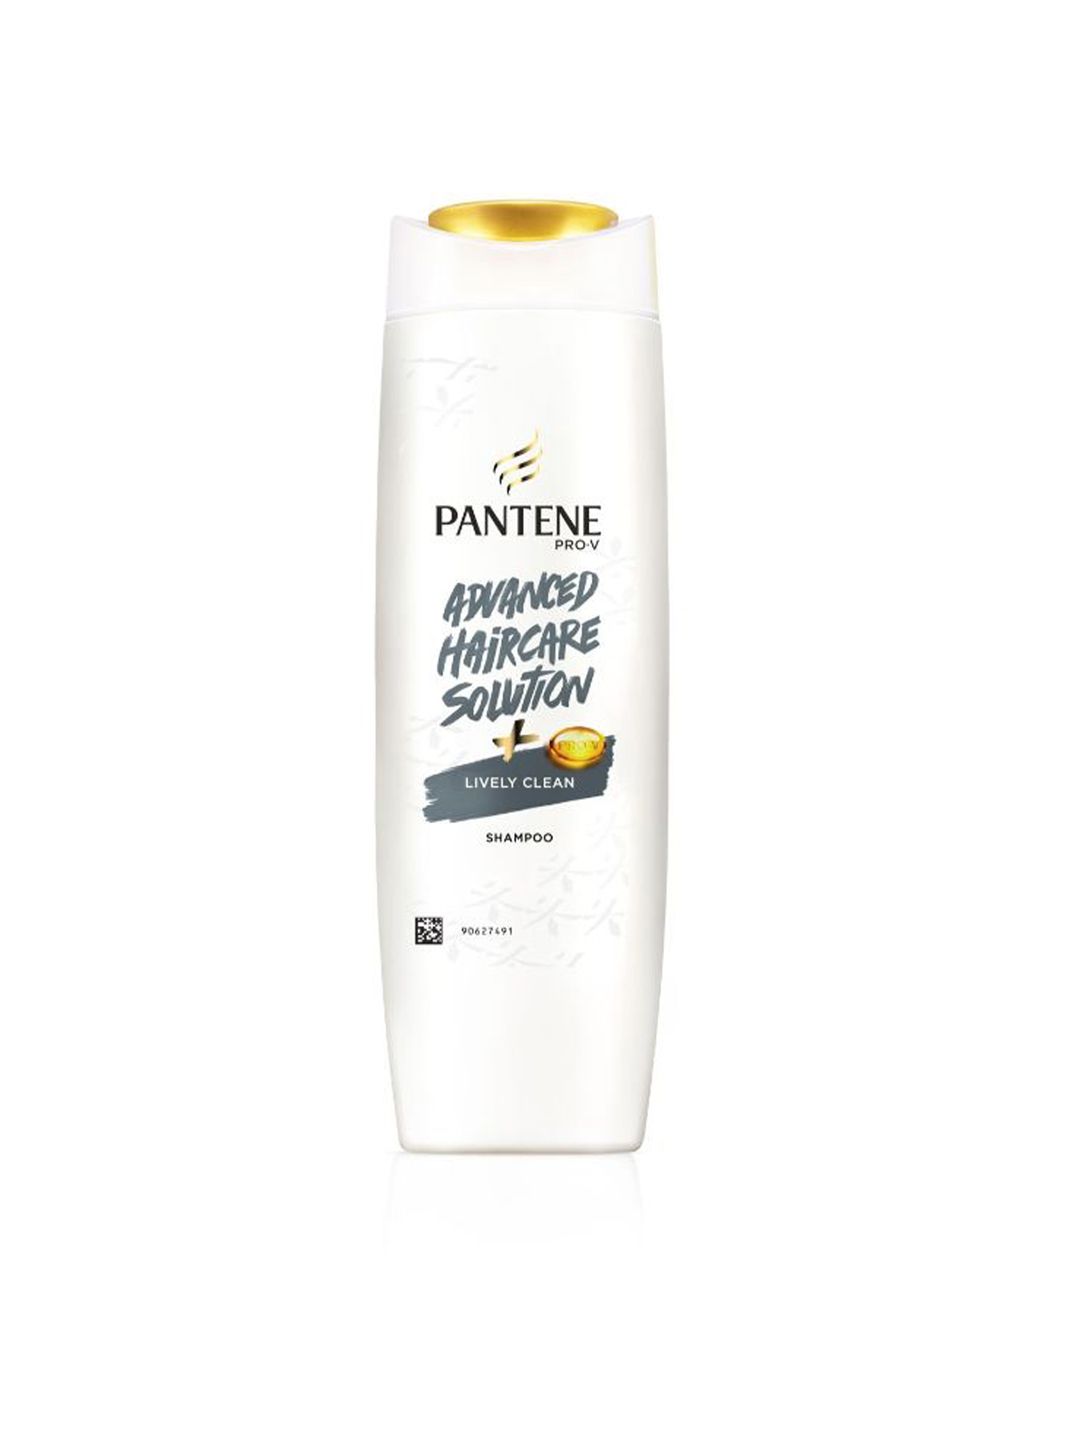 Pantene Unisex Advanced Hair Care Solution Lively Clean Shampoo with Pro-Vitamin 90 ml Price in India